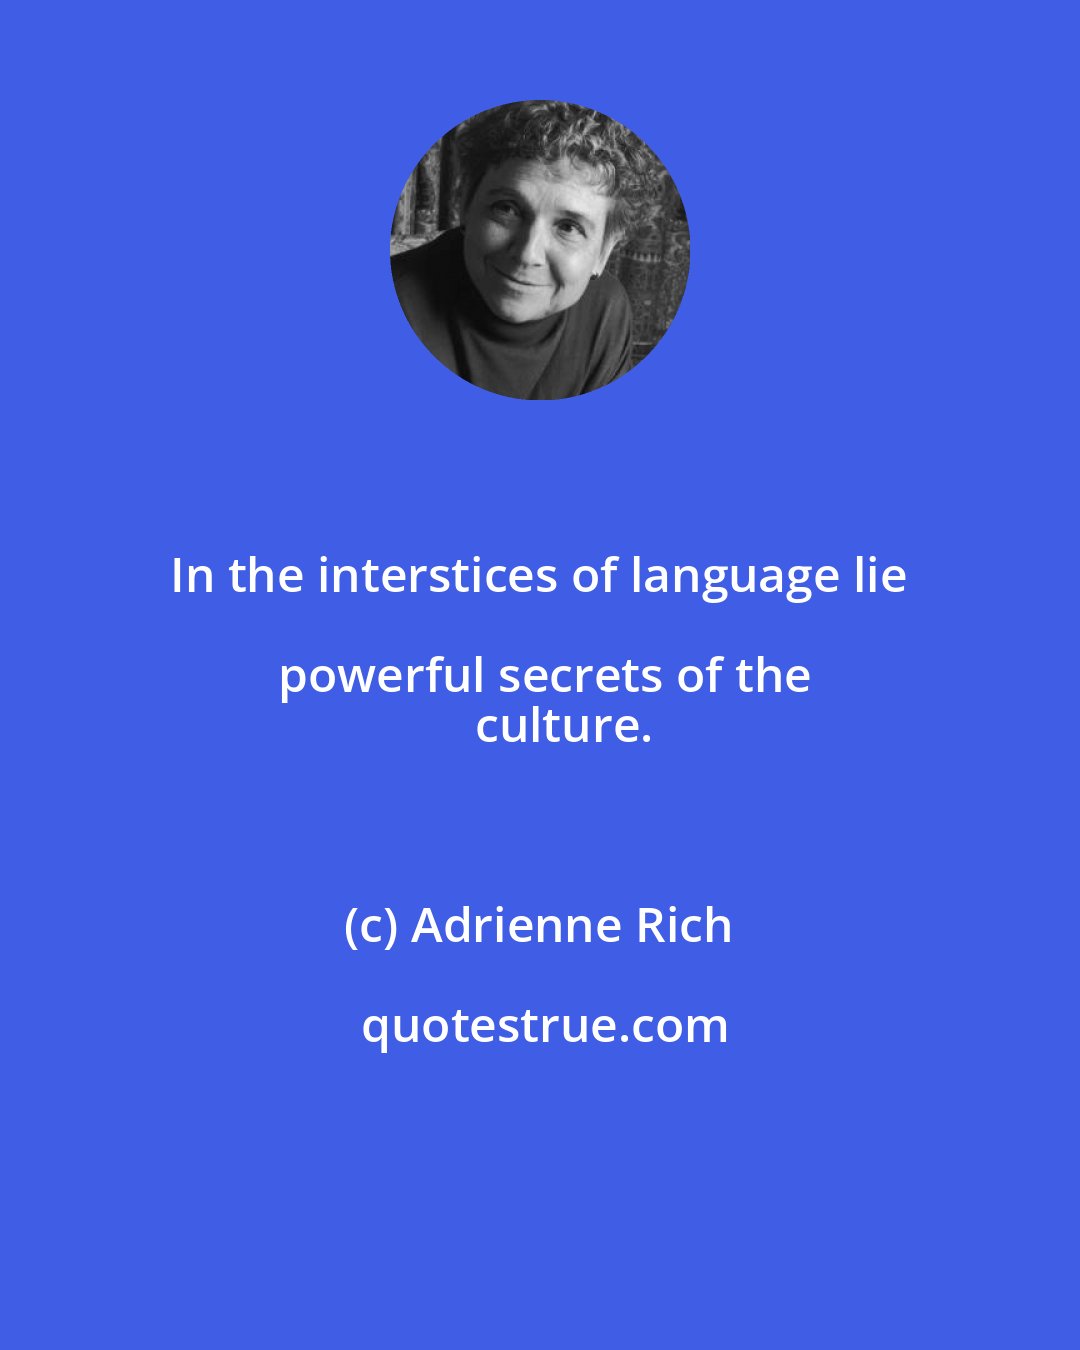 Adrienne Rich: In the interstices of language lie powerful secrets of the
     culture.